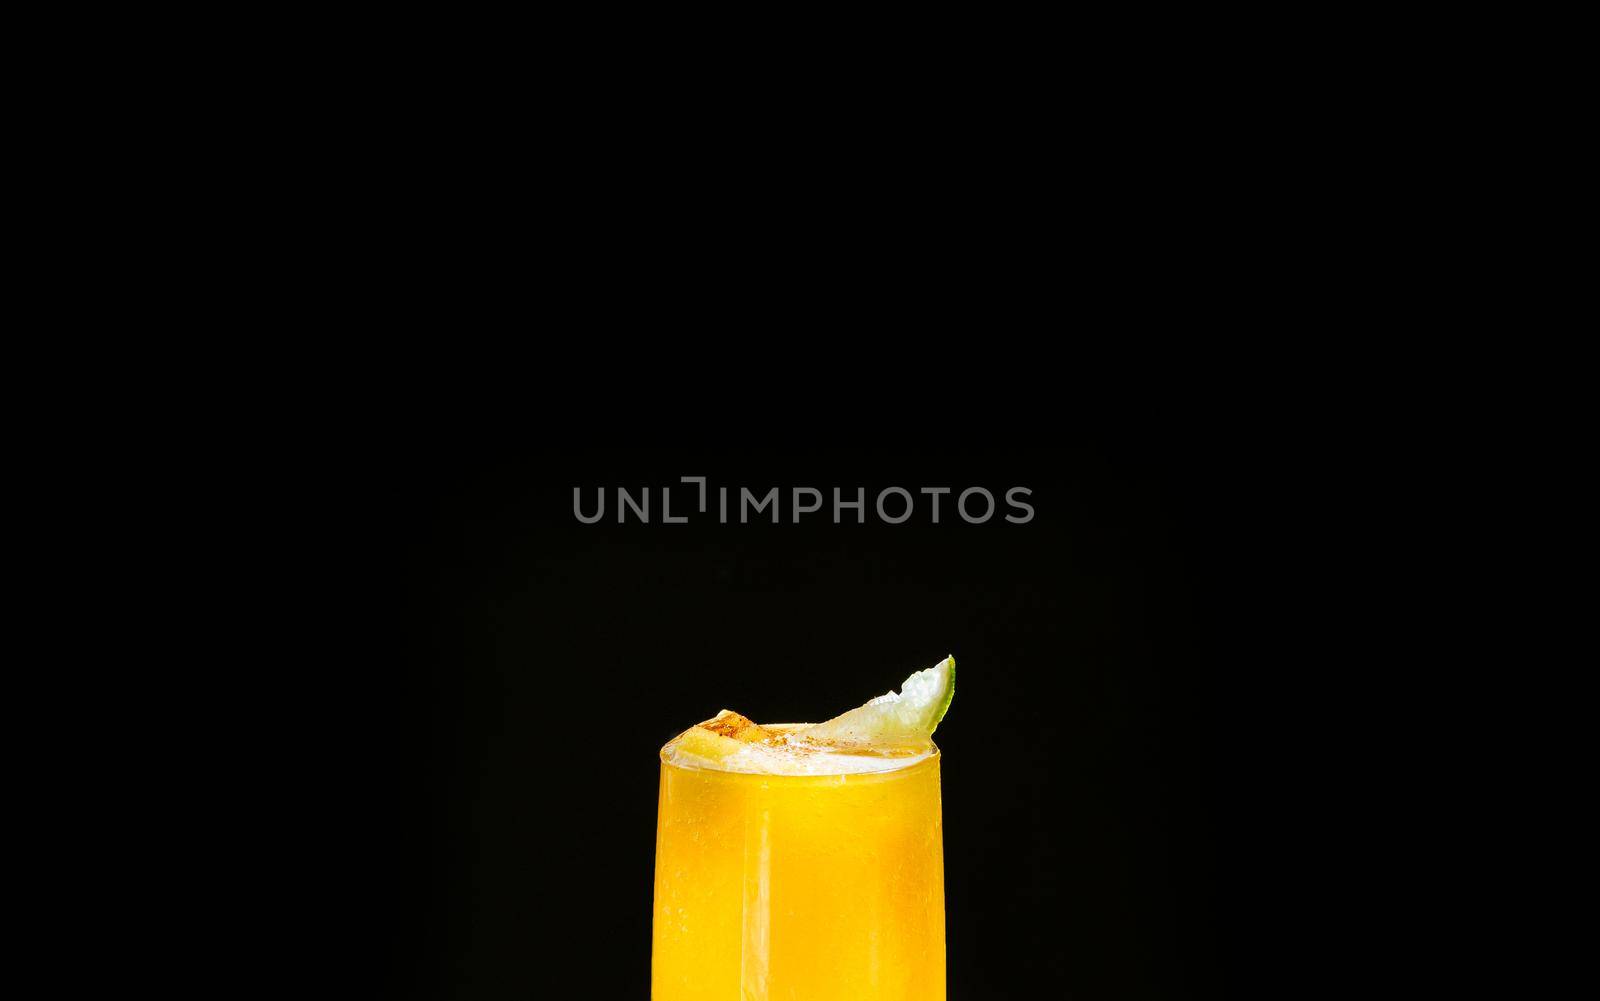 A Mexican smoothie drink made from mango, chili peppers, salt, and lime. A refreshing summer smoothie on a black background of bright orange. by gulyaevstudio